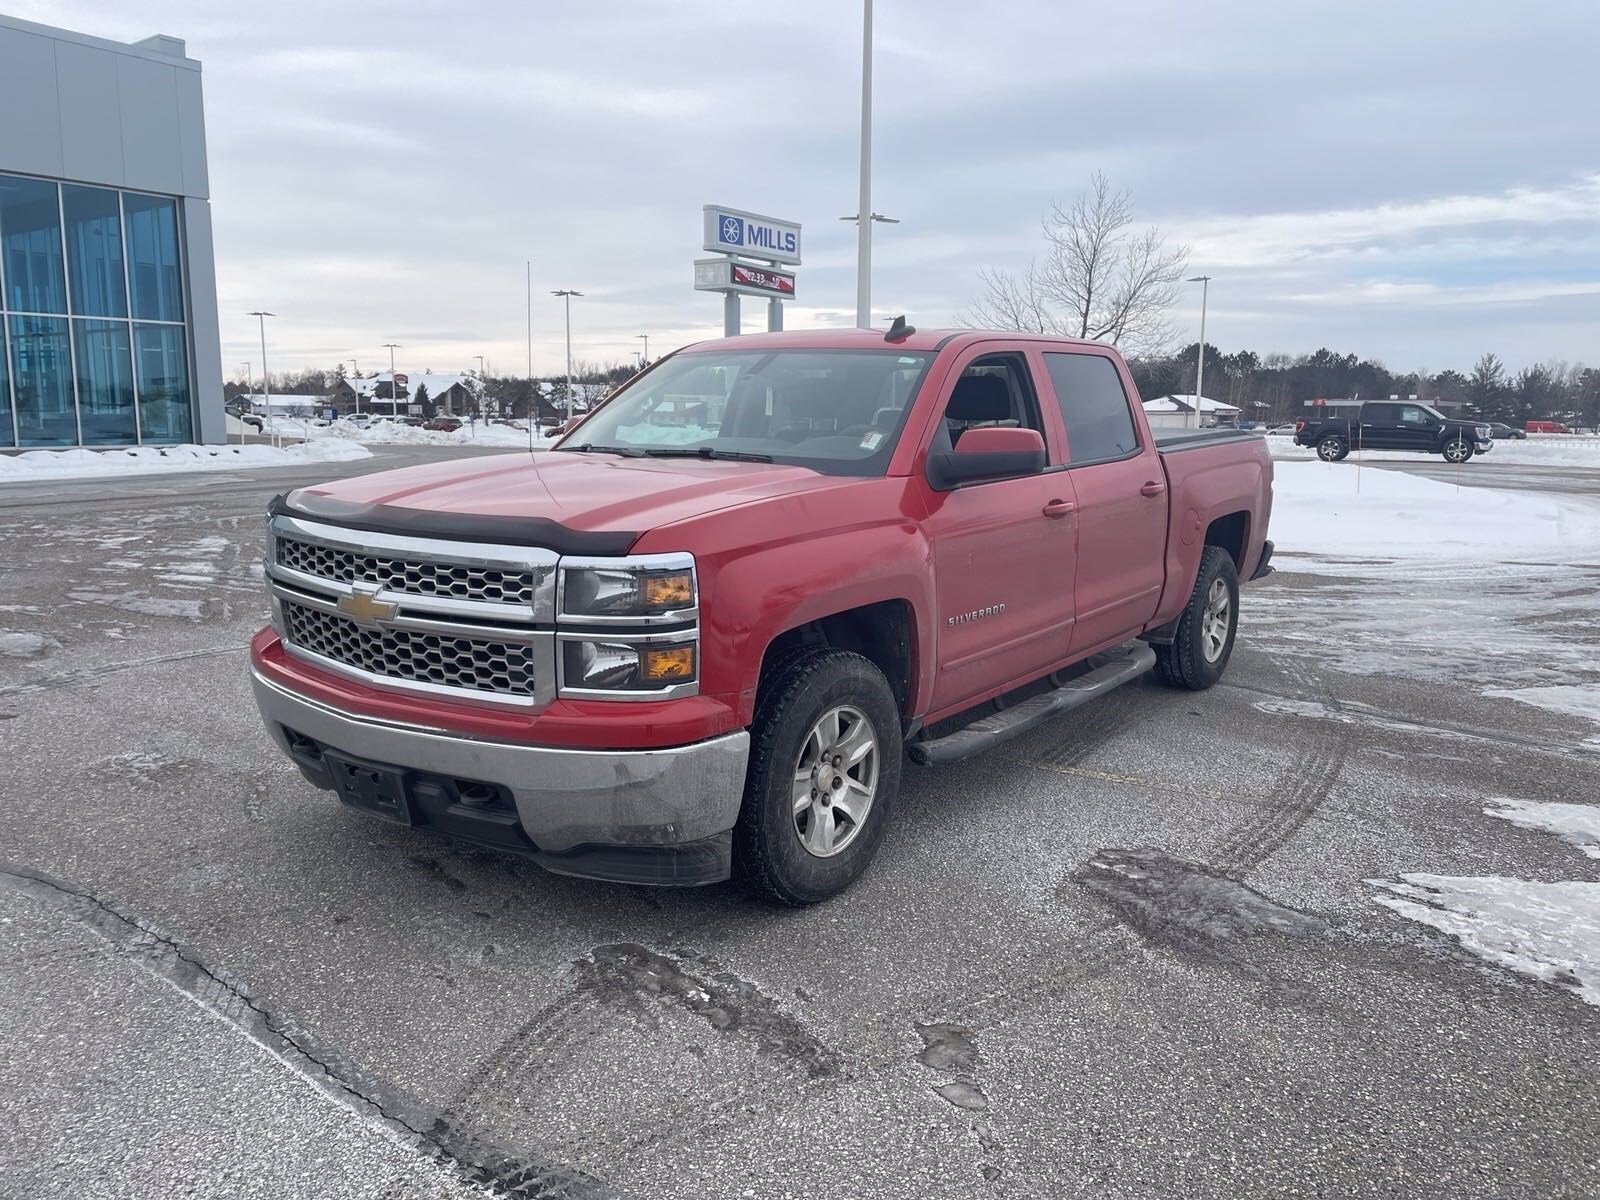 Used 2015 Chevrolet Silverado 1500 LT with VIN 3GCUKREC3FG170327 for sale in Baxter, Minnesota